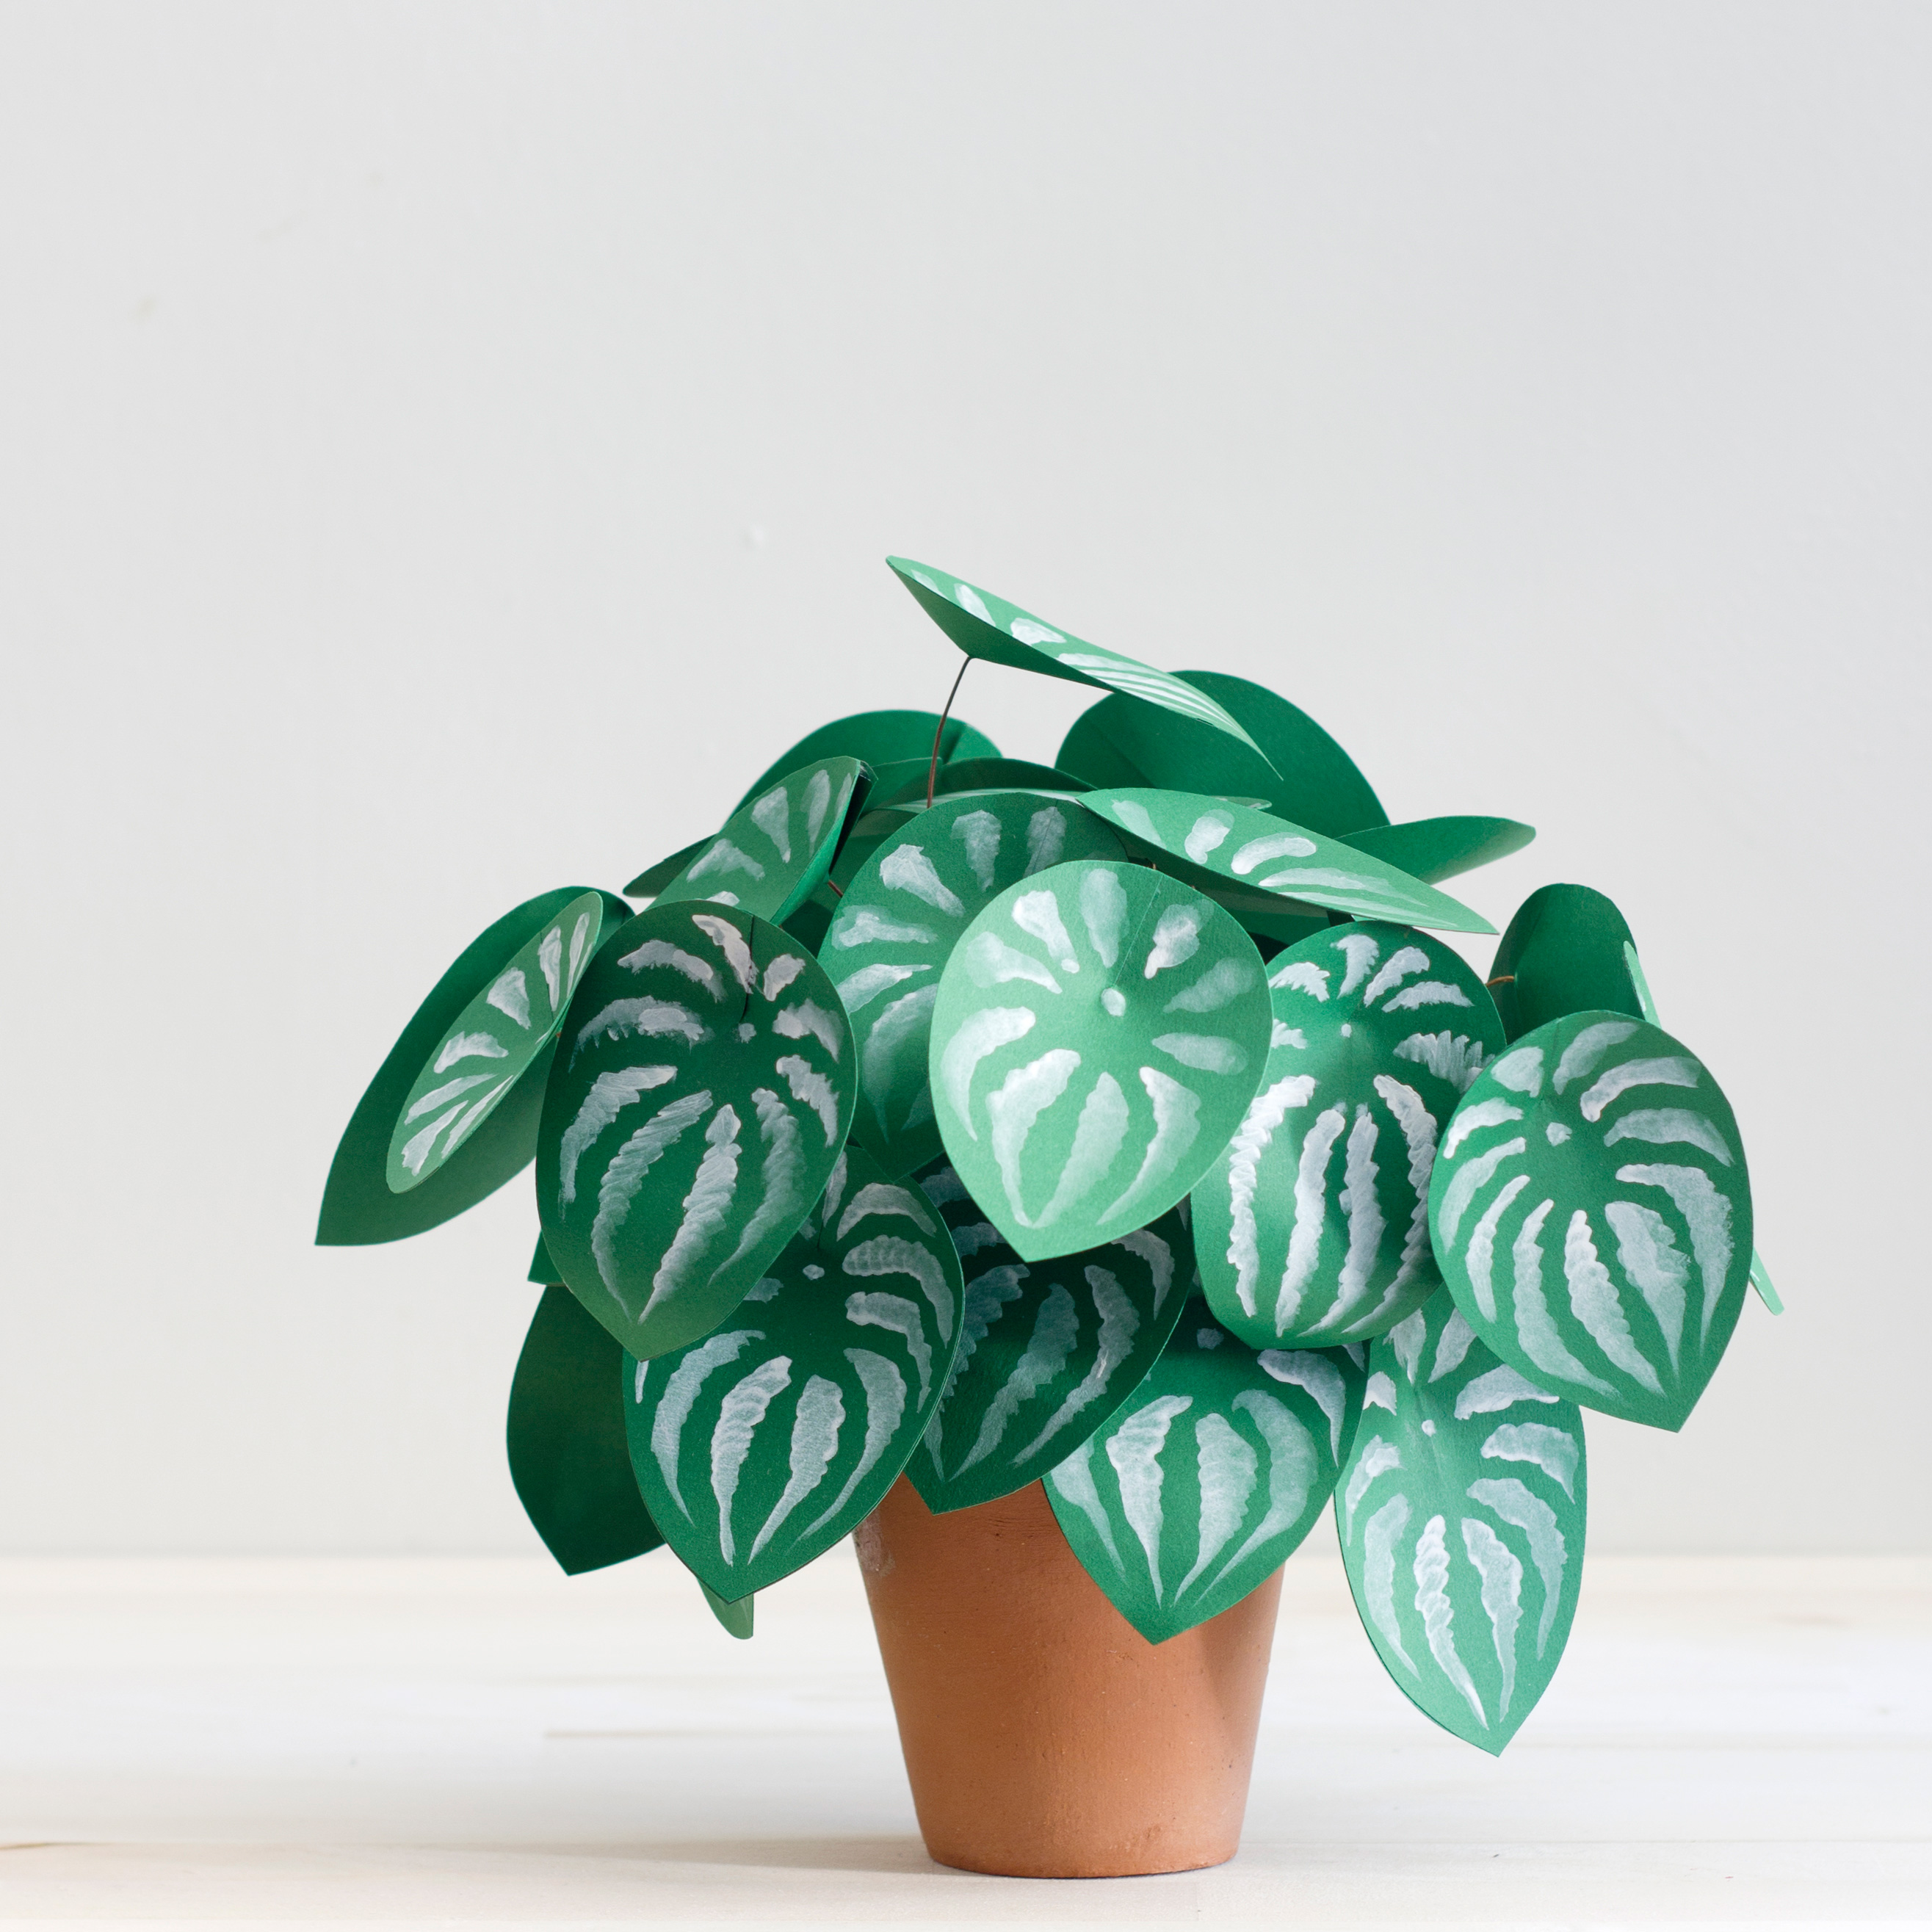 Corrie_Beth_Hogg_paper_plant_watermelon_perperomia2